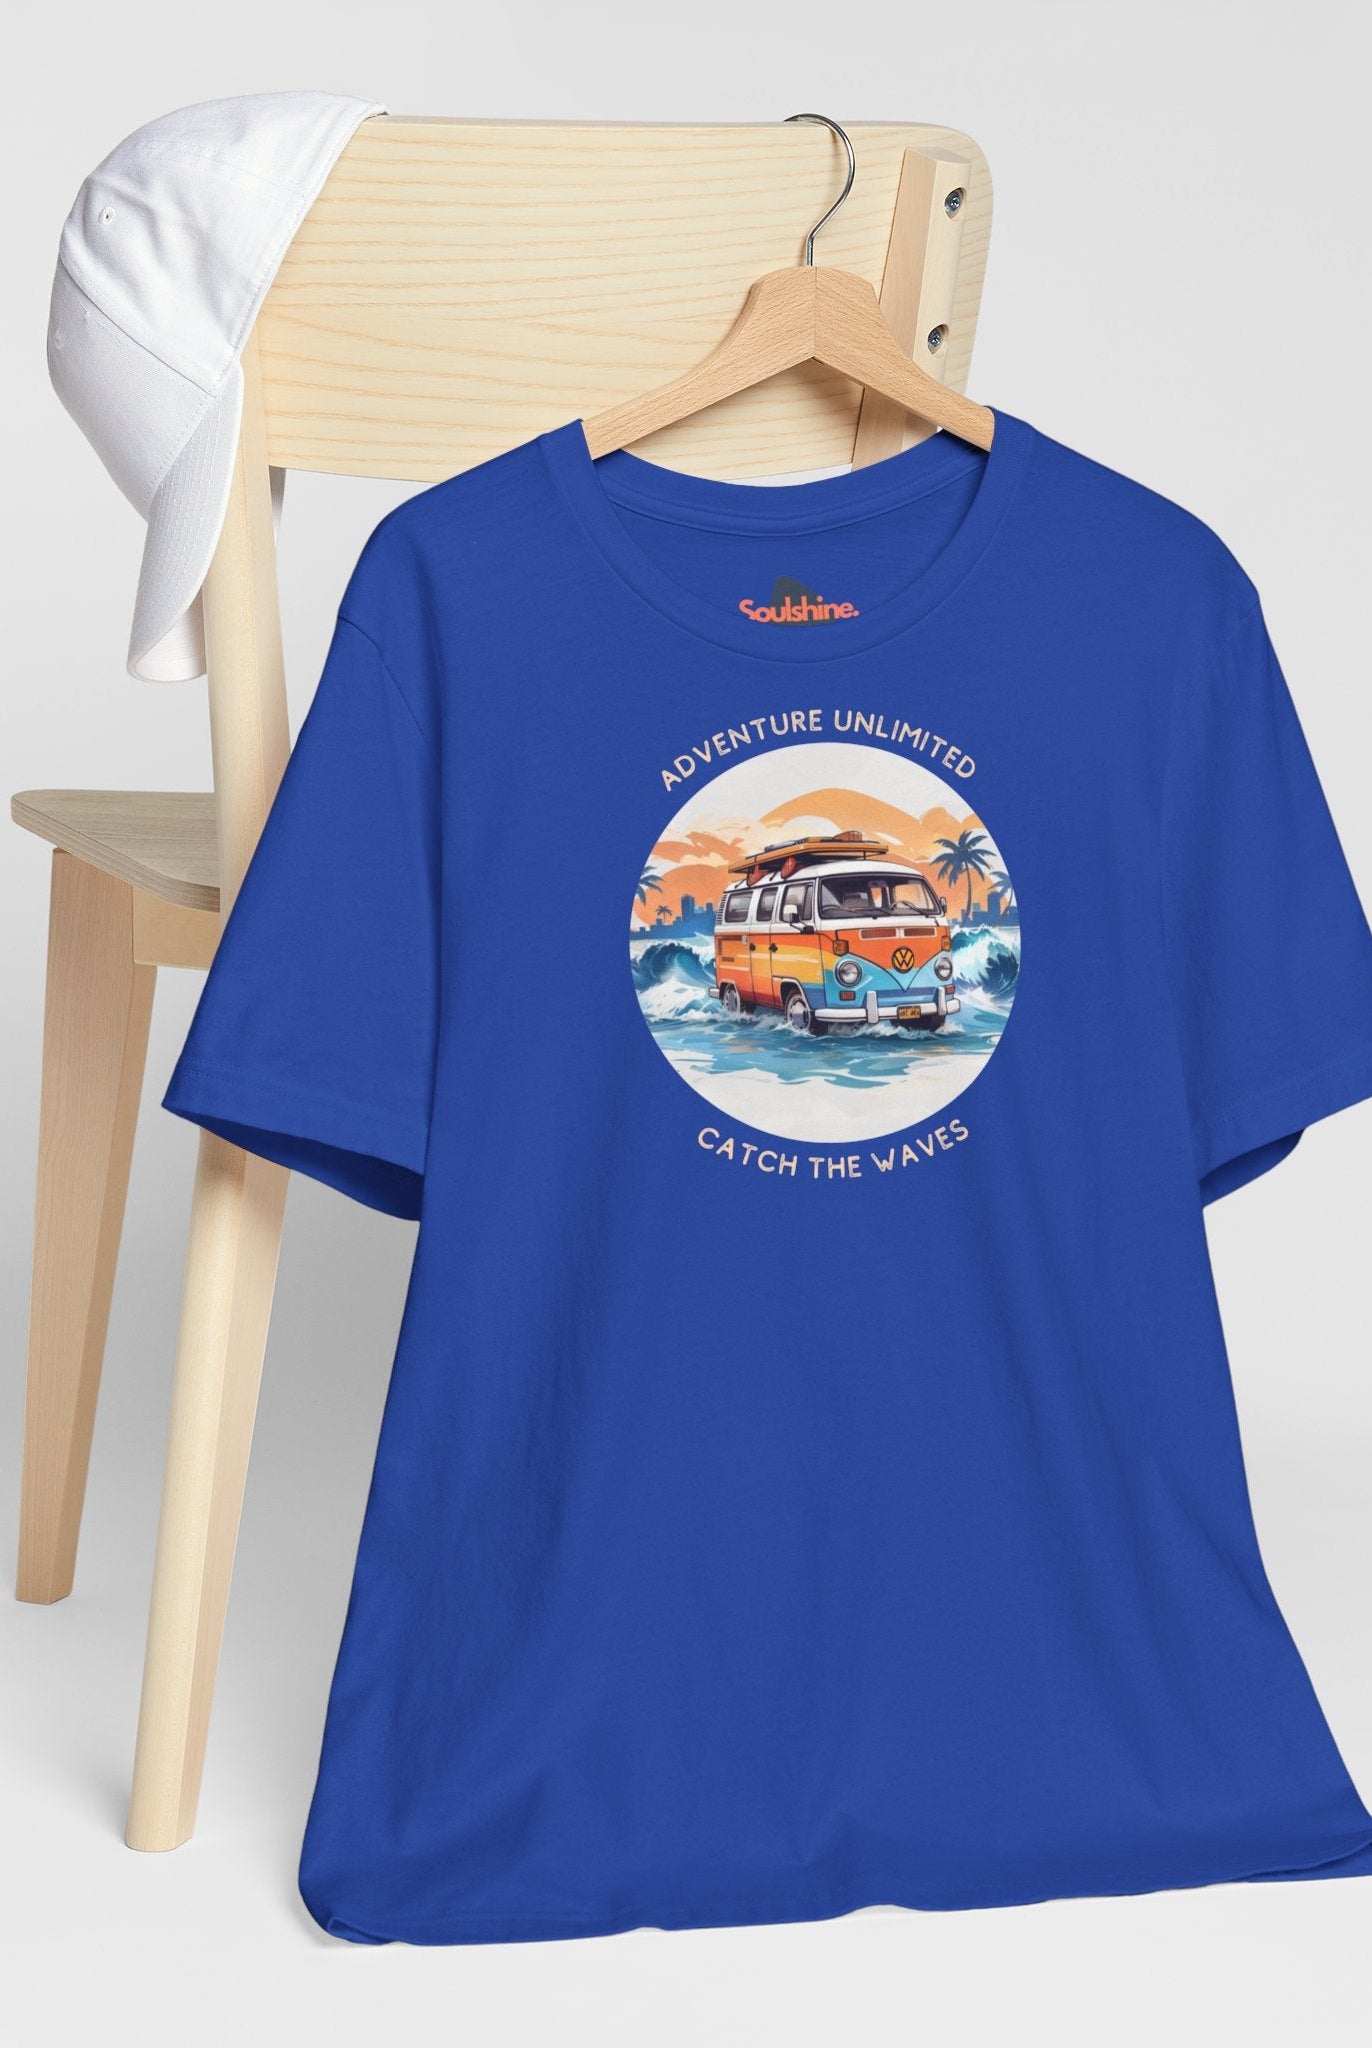 Blue van graphic printed on Adventure Unlimited Surfing T-shirt by Soulshinecreators